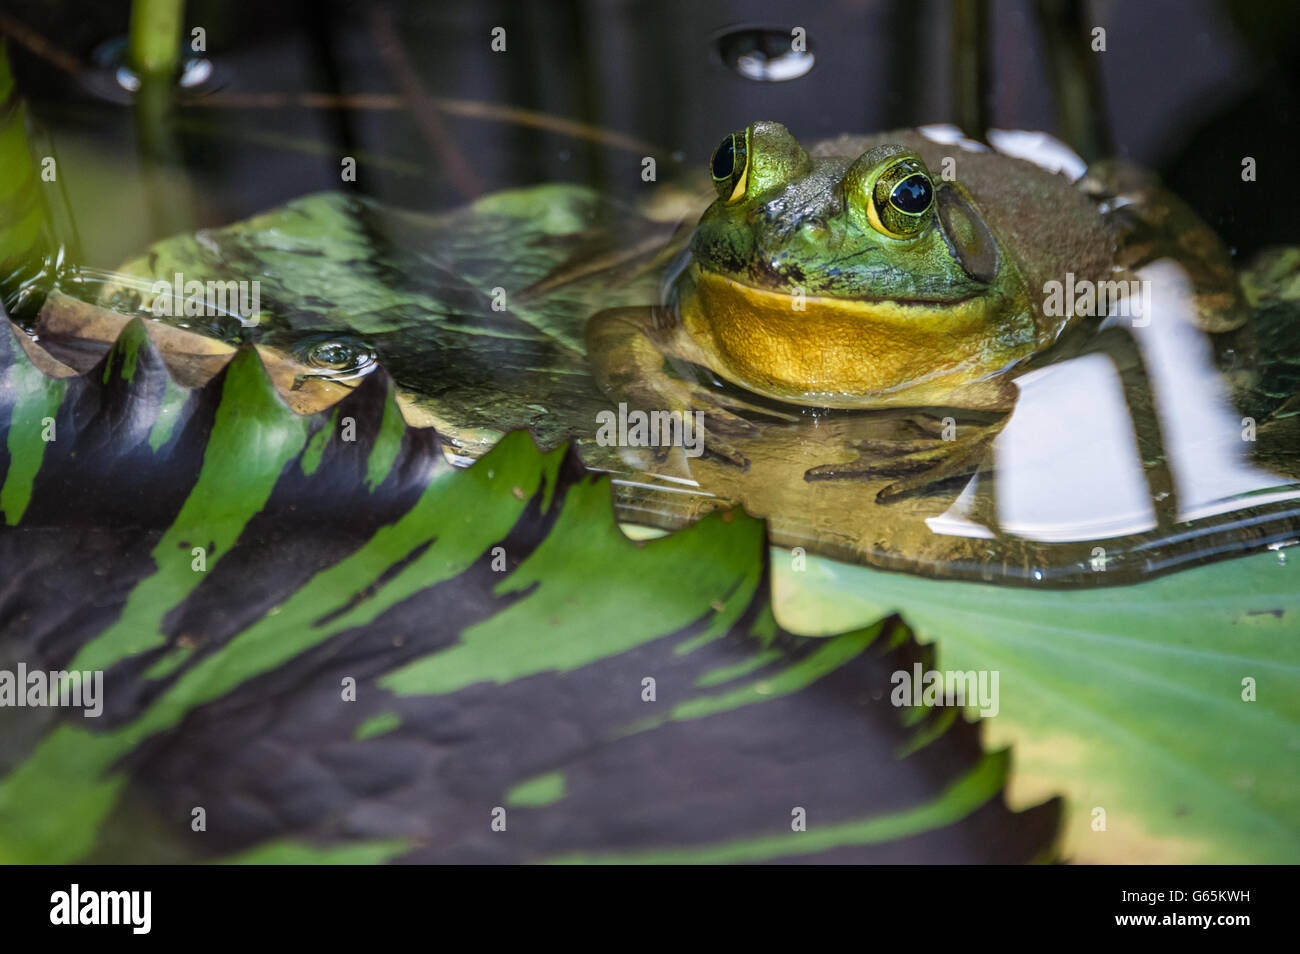 Frog on a lily pad. Stock Photo